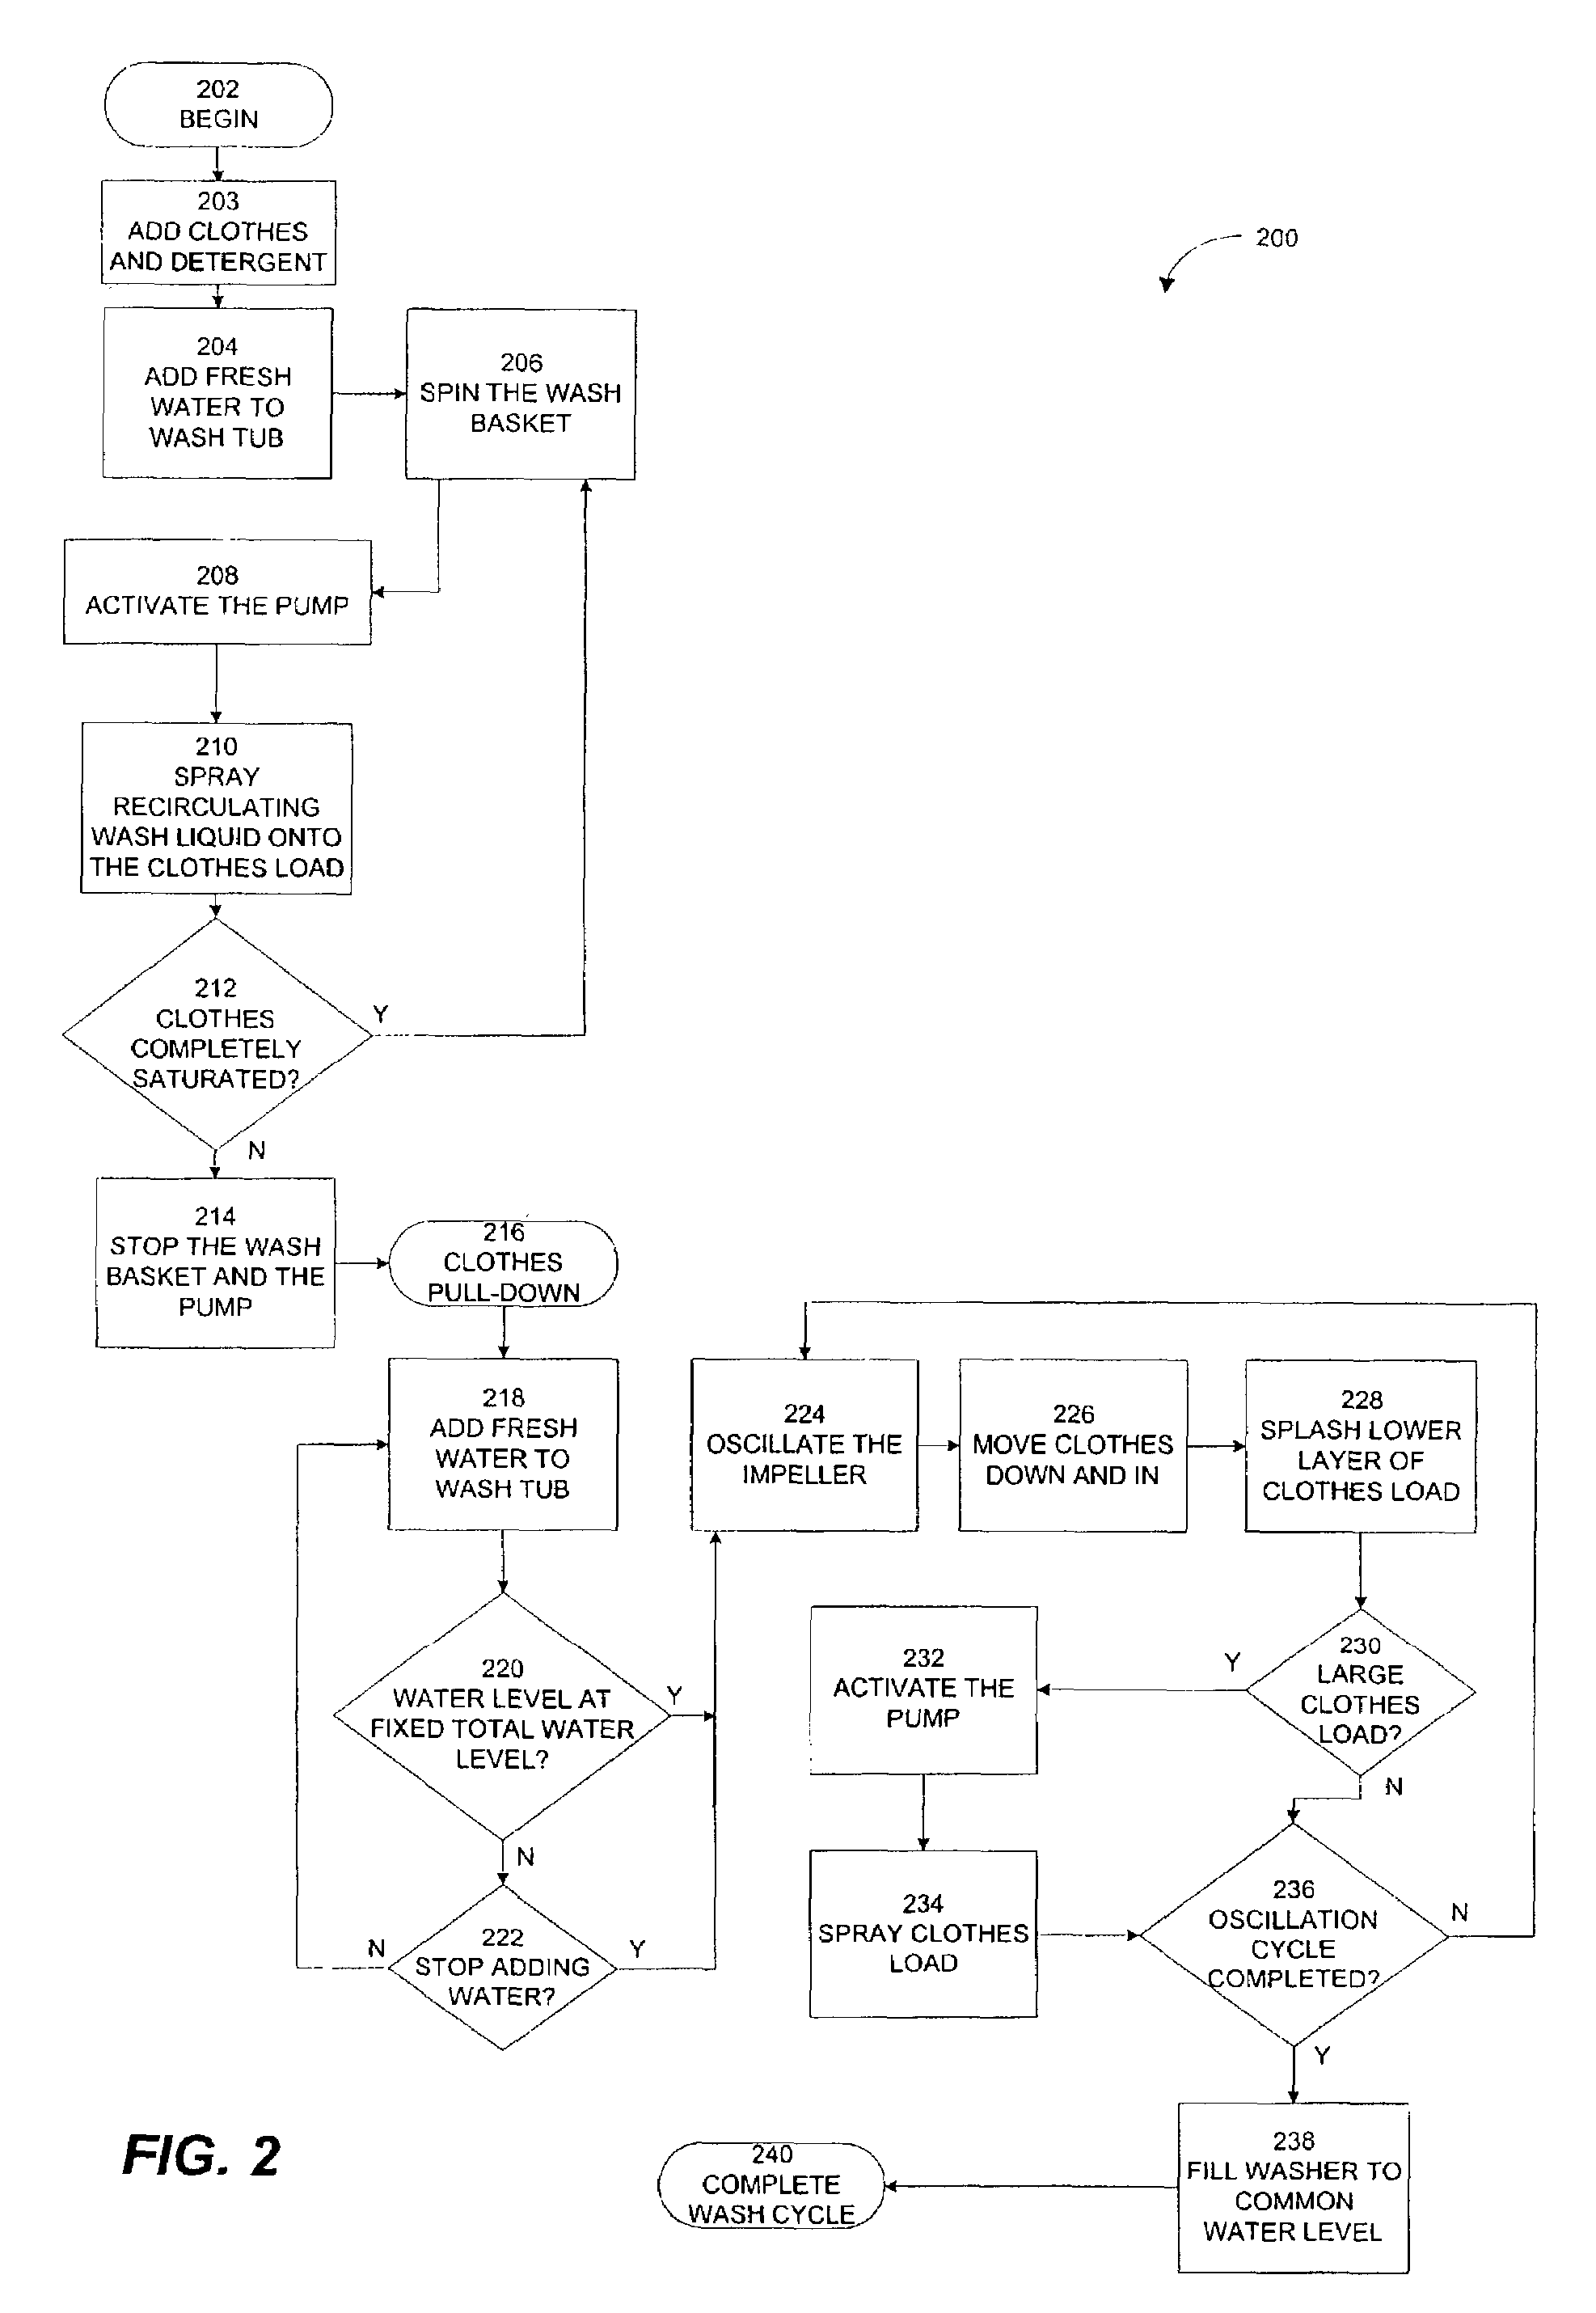 Method for washing varying clothes loads in automatic washer using common water level